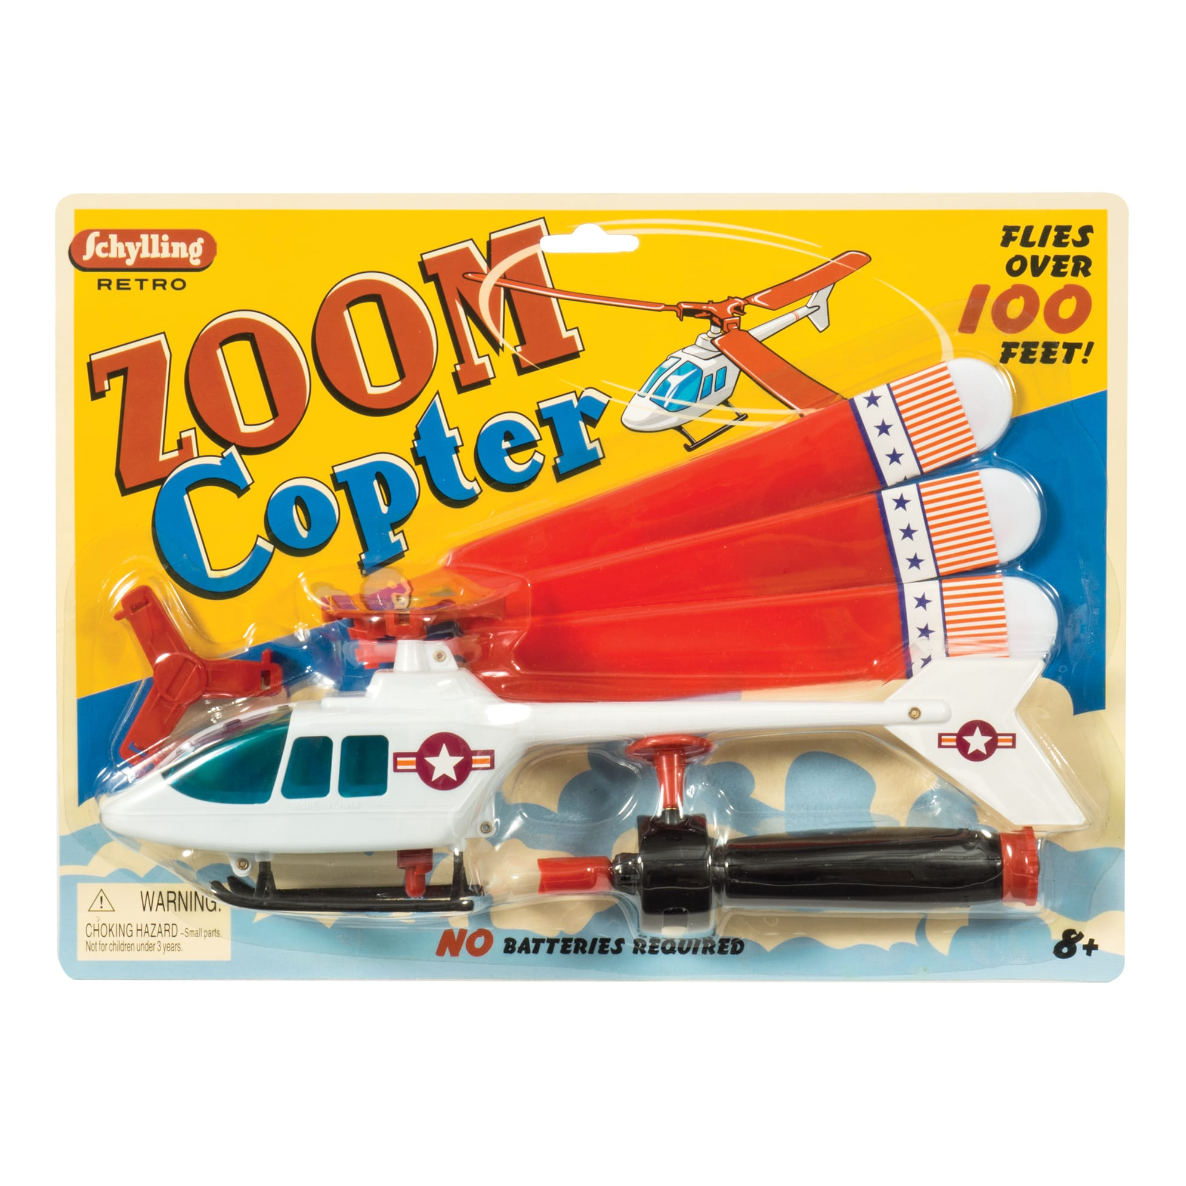 Zoom Copter front packaging